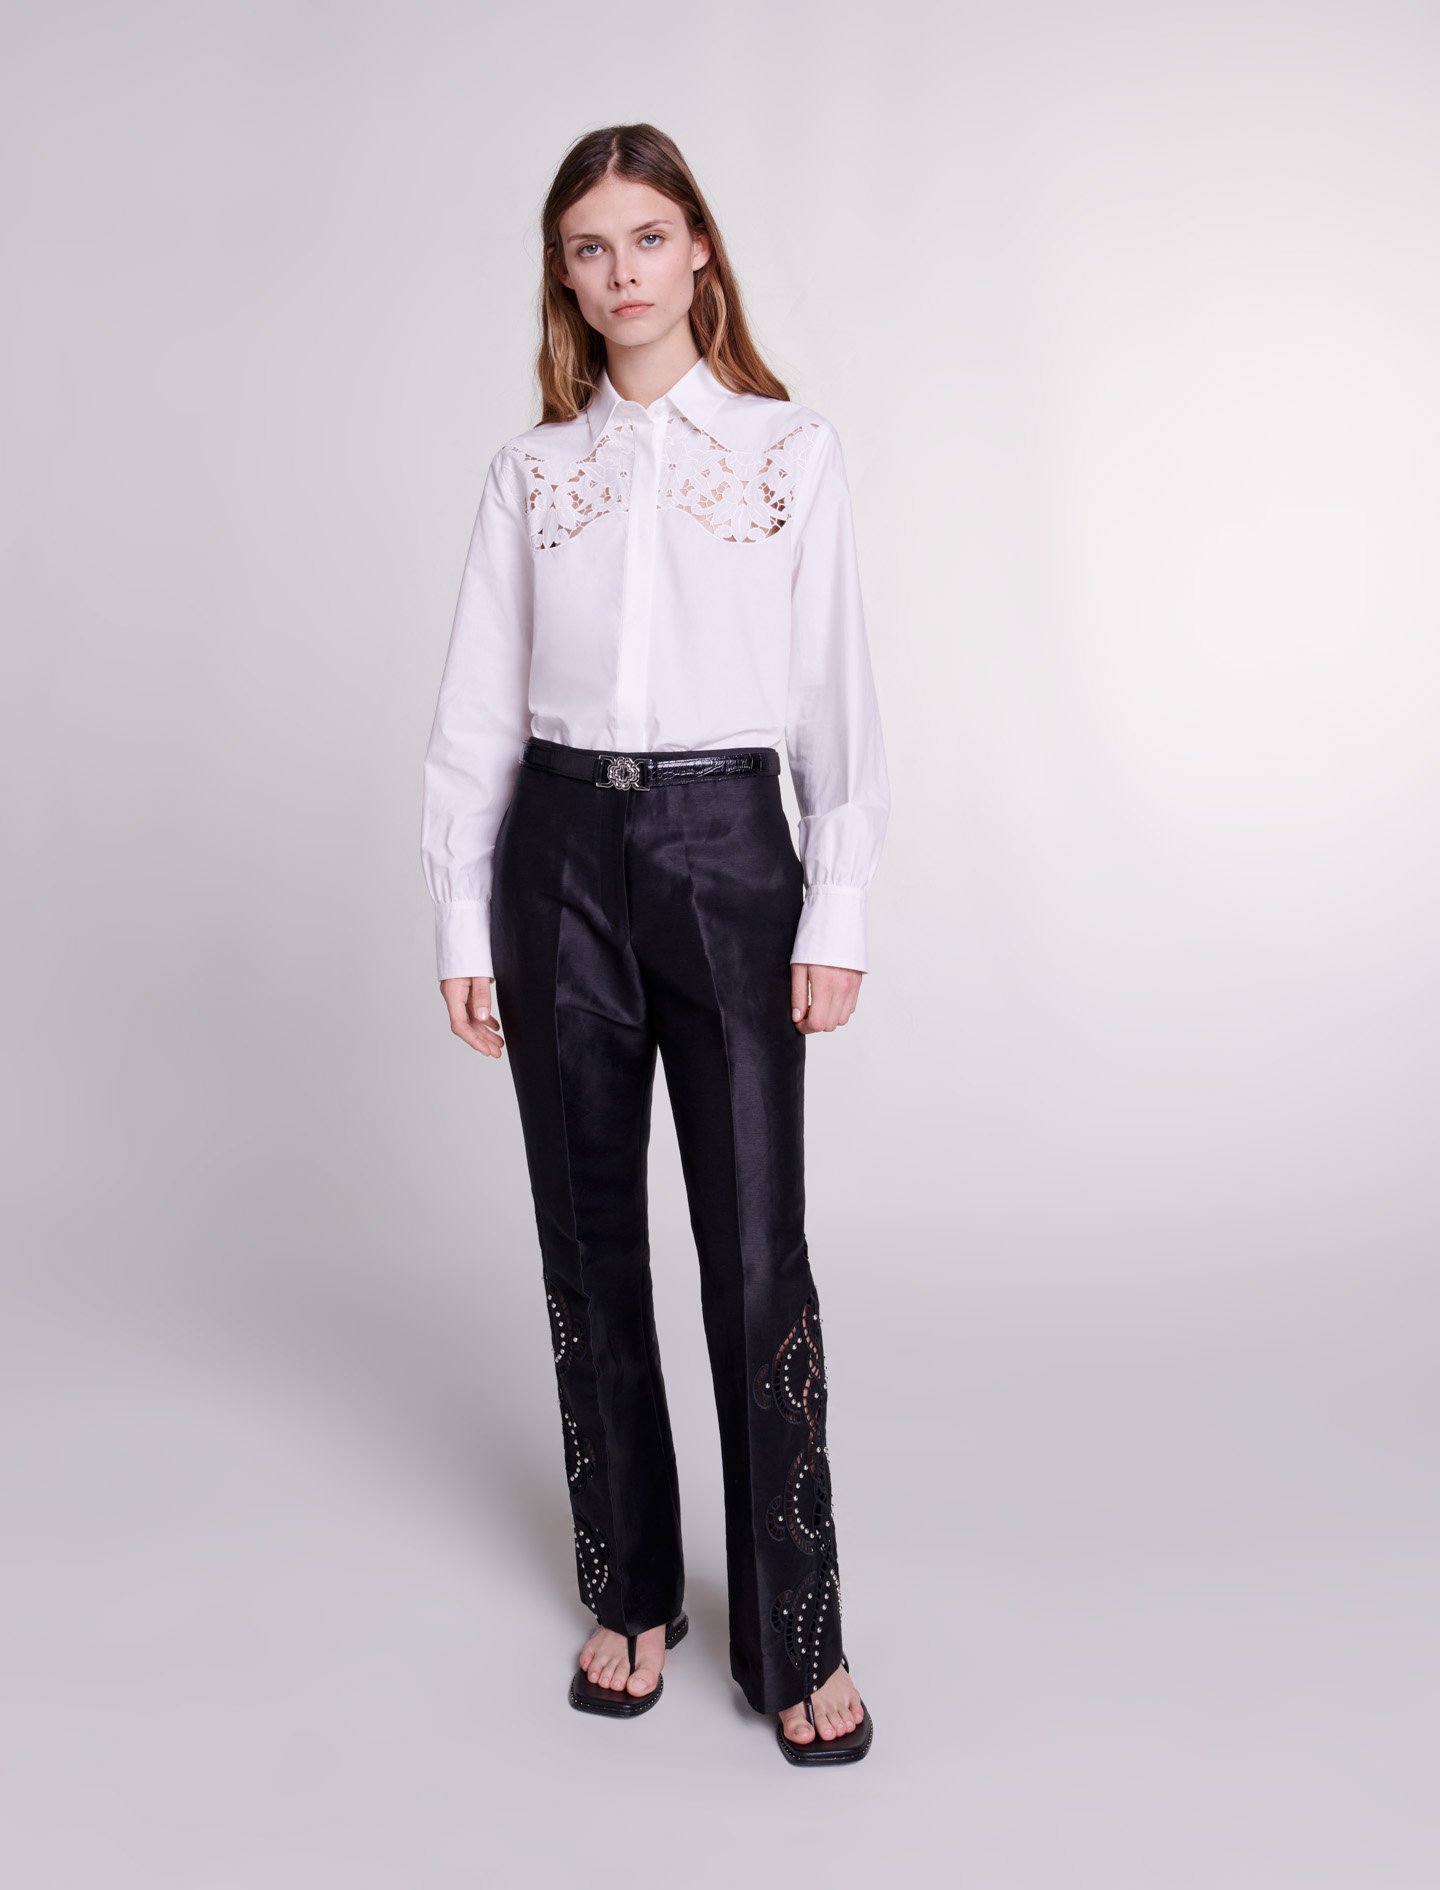 Maje Woman's linen, Openwork flared trousers for Spring/Summer, in color Black / Black